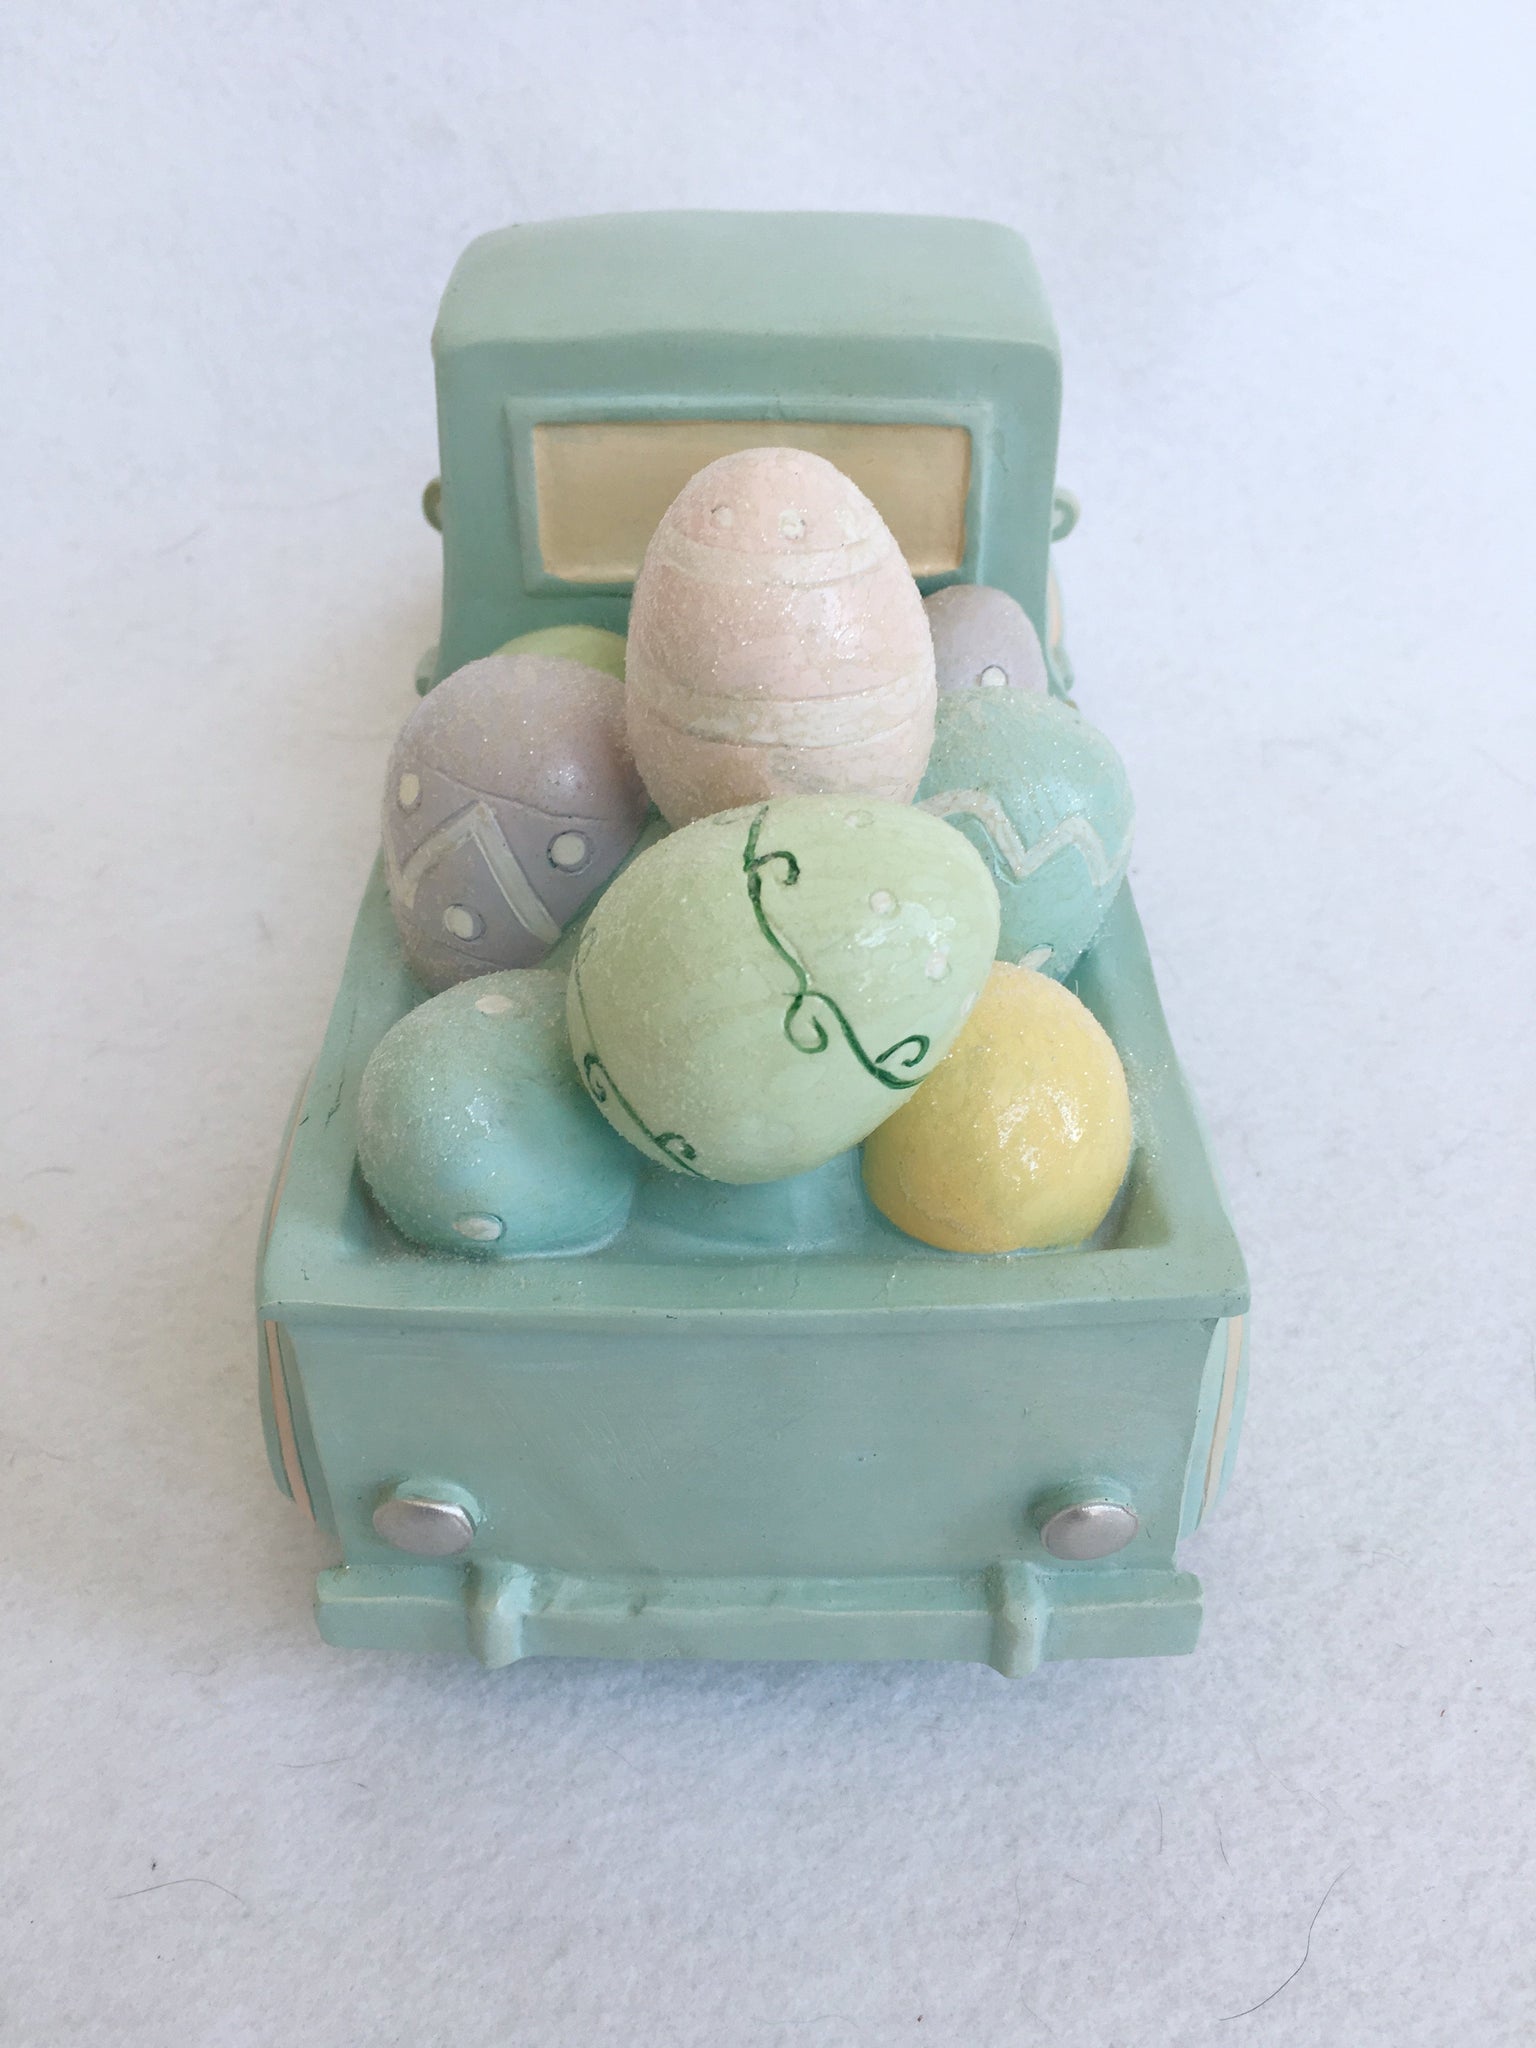 Adorable K's Collection Large Decorative Ceramic Easter Eggs Straw & Crate  Lot